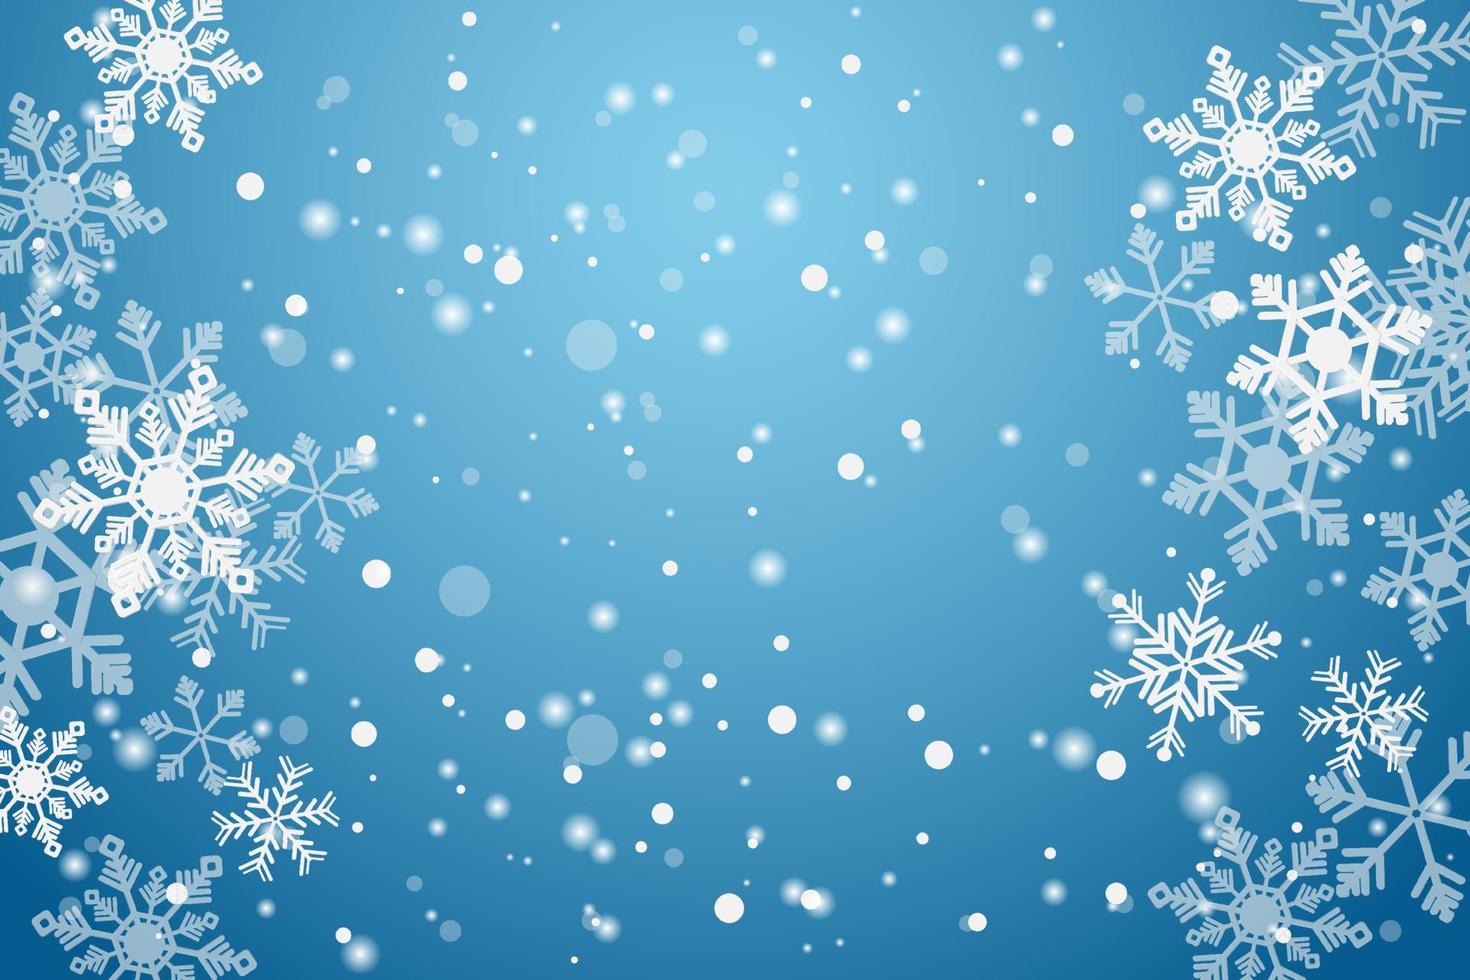 Winter Background with White Snowflakes Graphic by Bellart